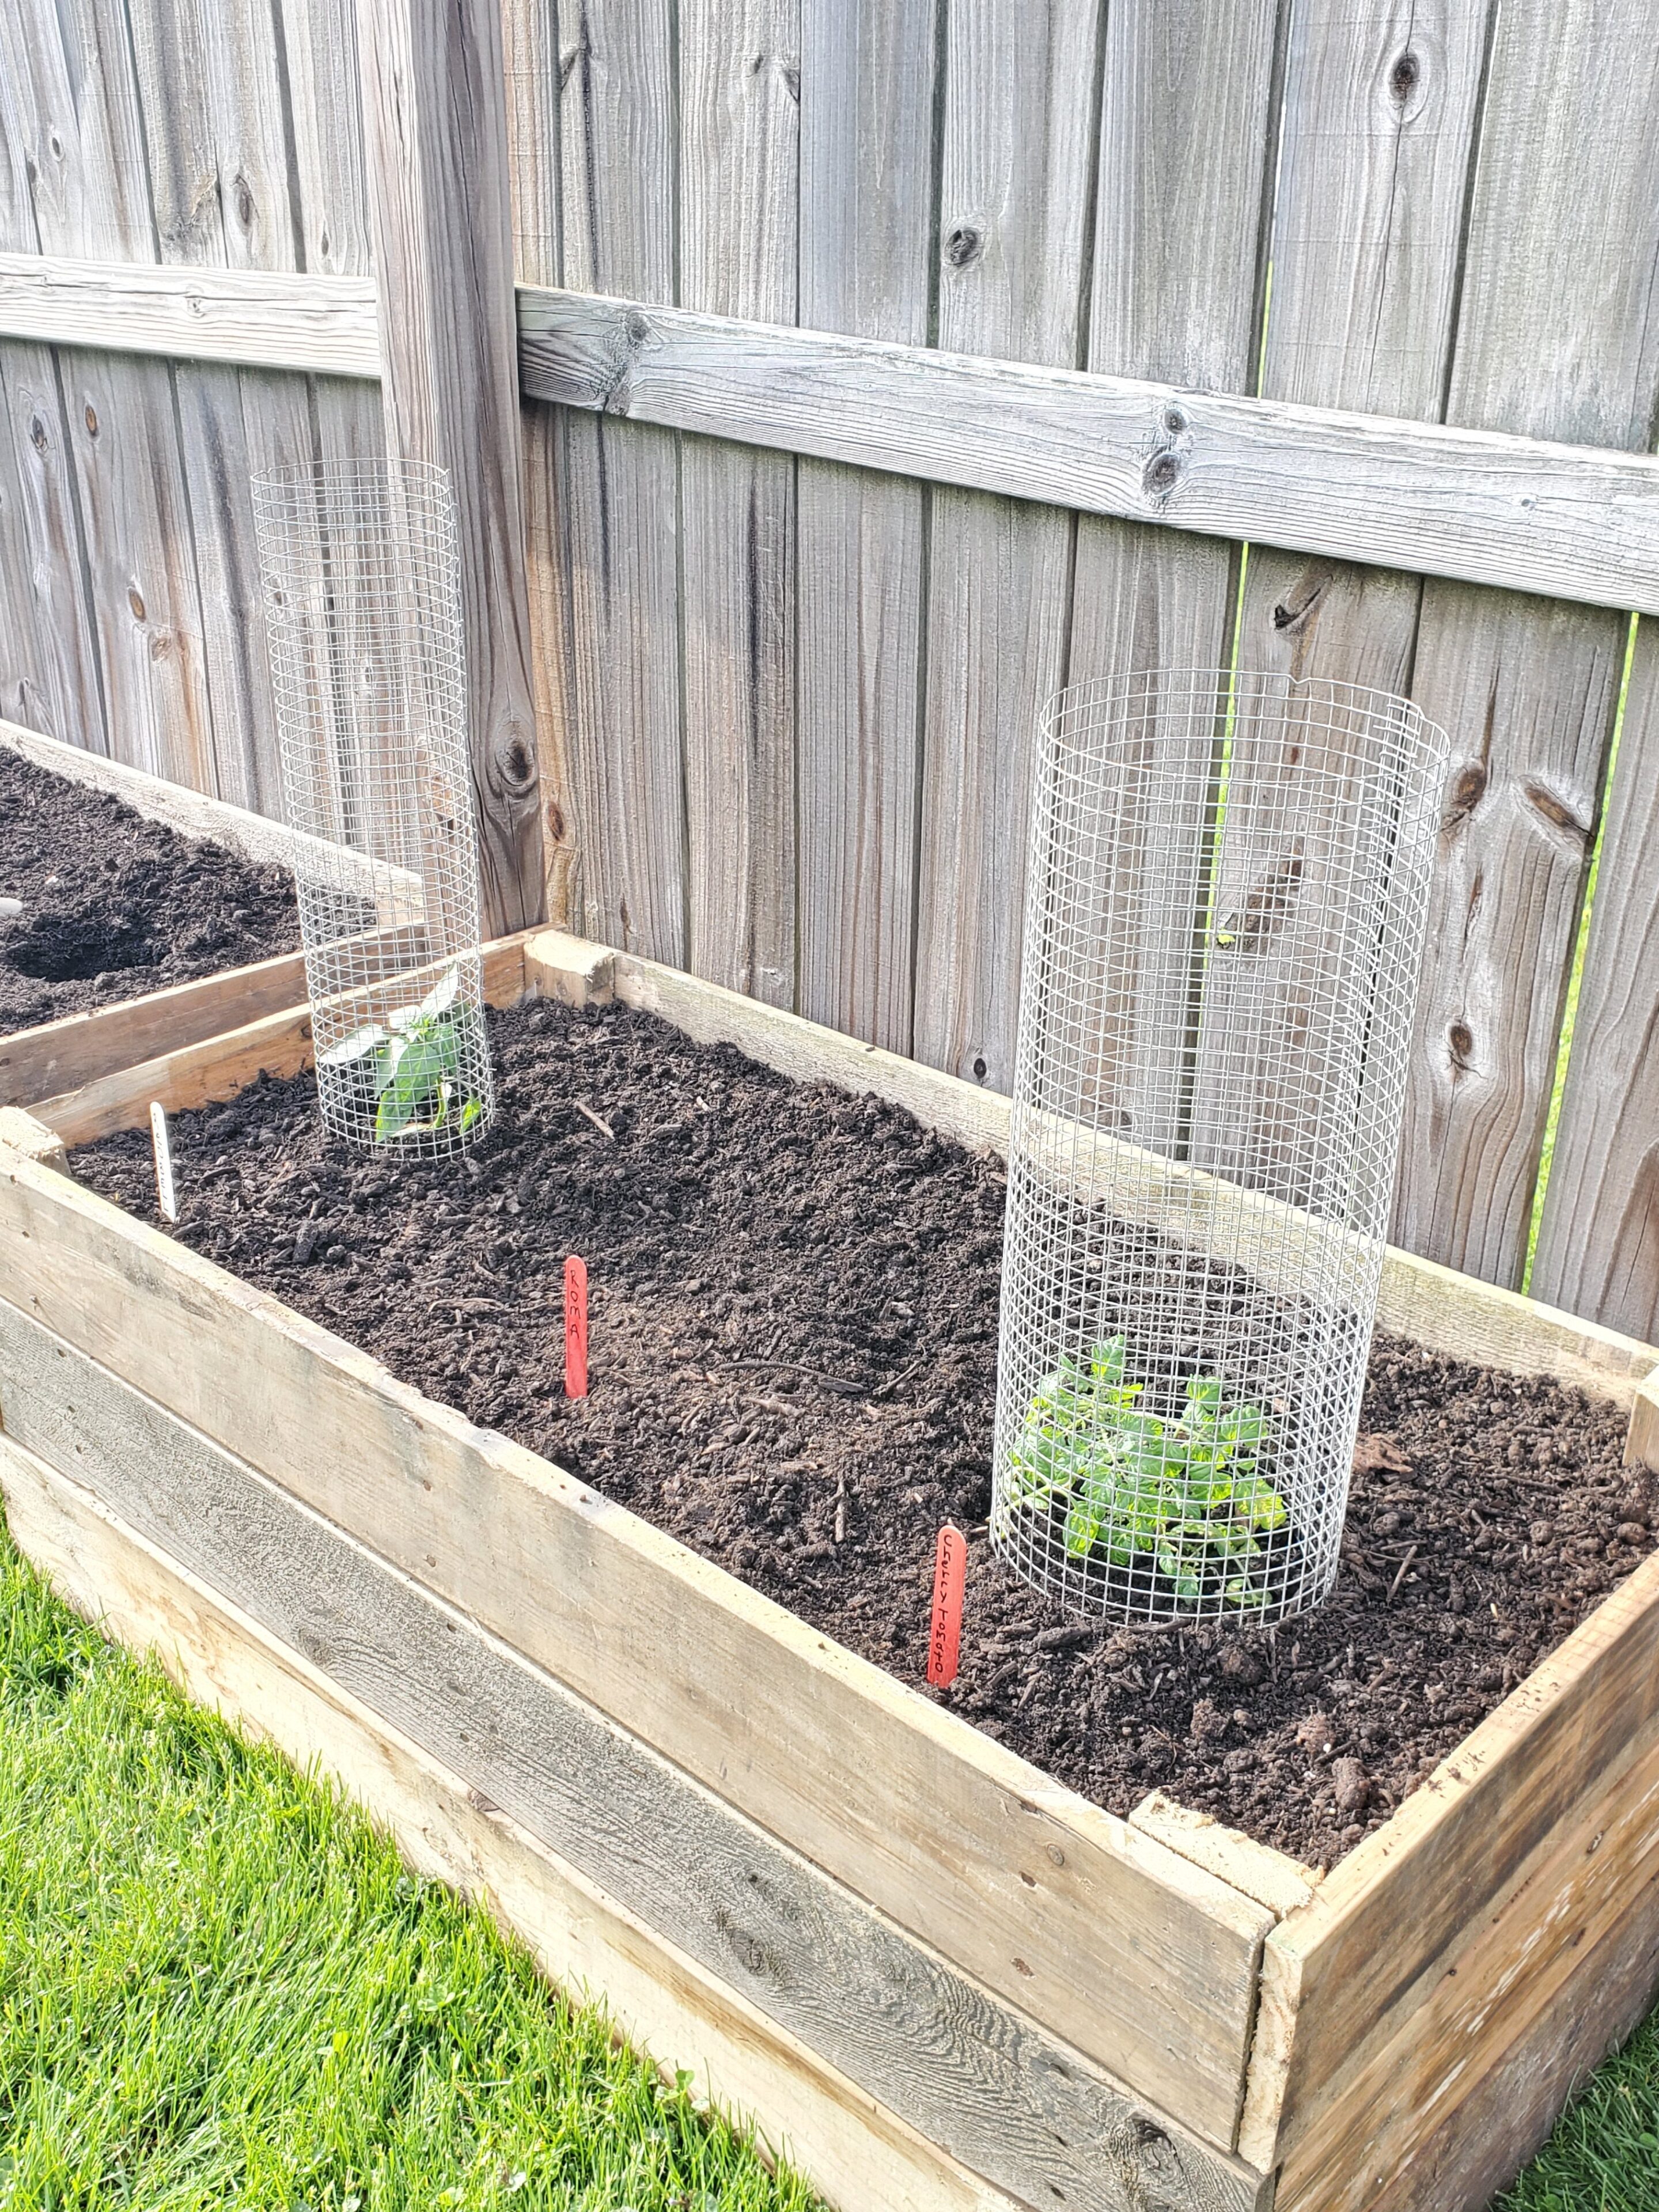 How To Build Raised Garden Beds From, How To Make A Raised Garden Using Pallets